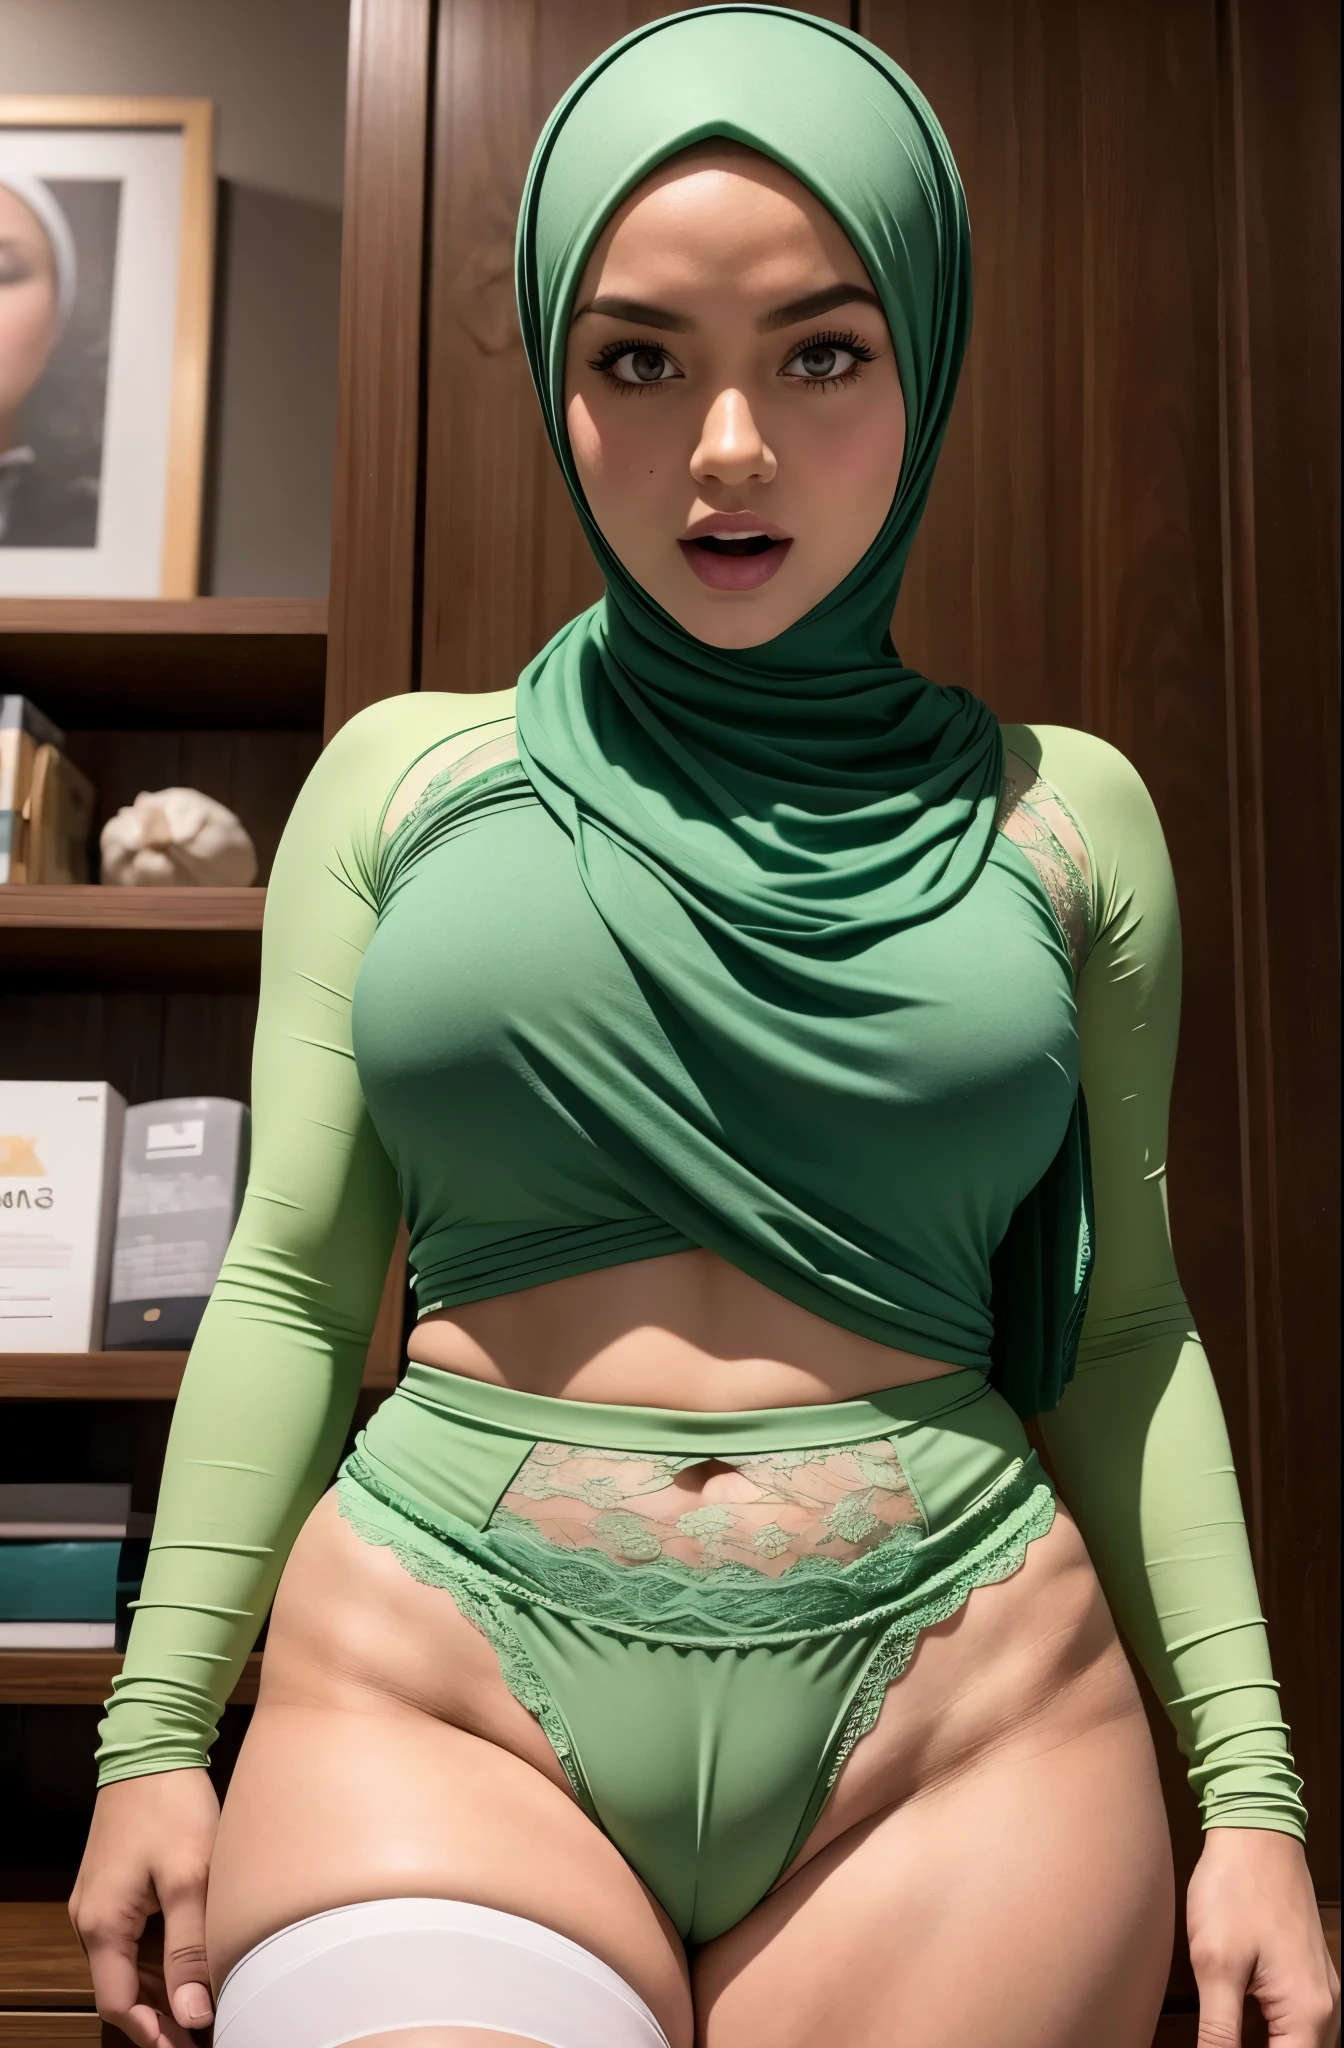 hijab naked Sultry Teen in Hijab Gets Naked in Bedroom Photo | Pornify ...